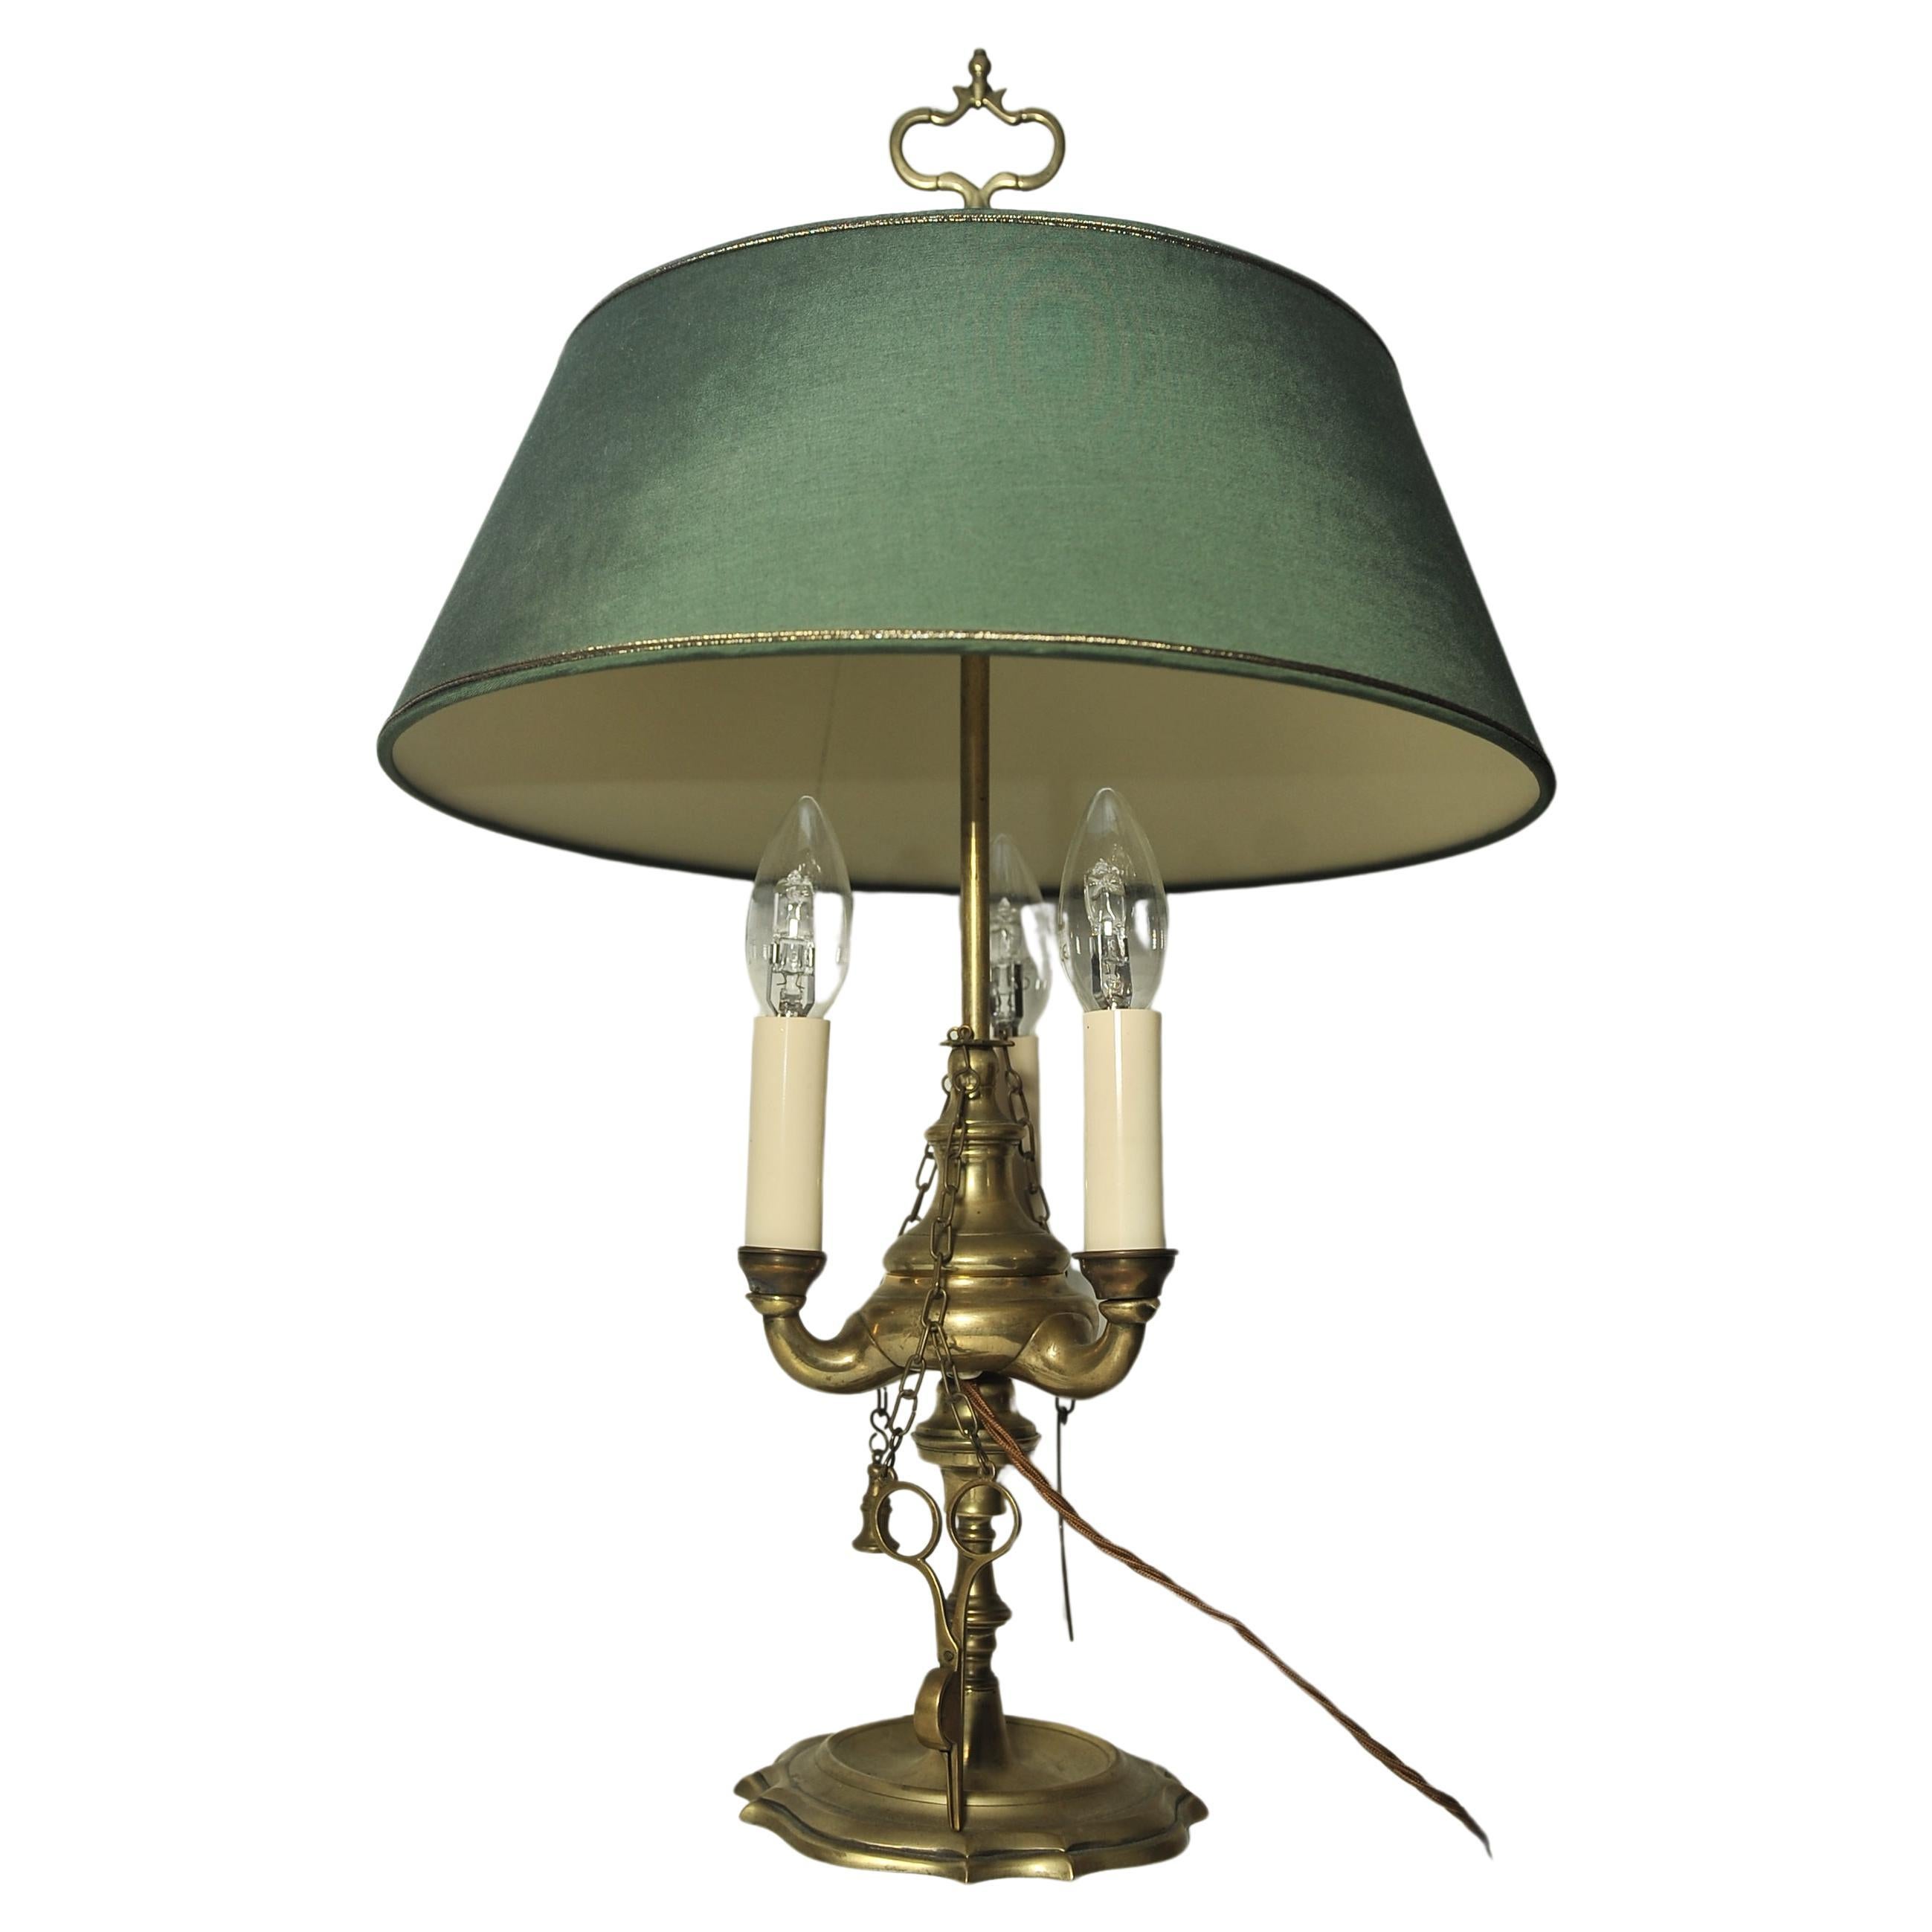 A Rare Brass Bouillotte Triple Branch Table Lamp With Height Adjustable Shade  For Sale